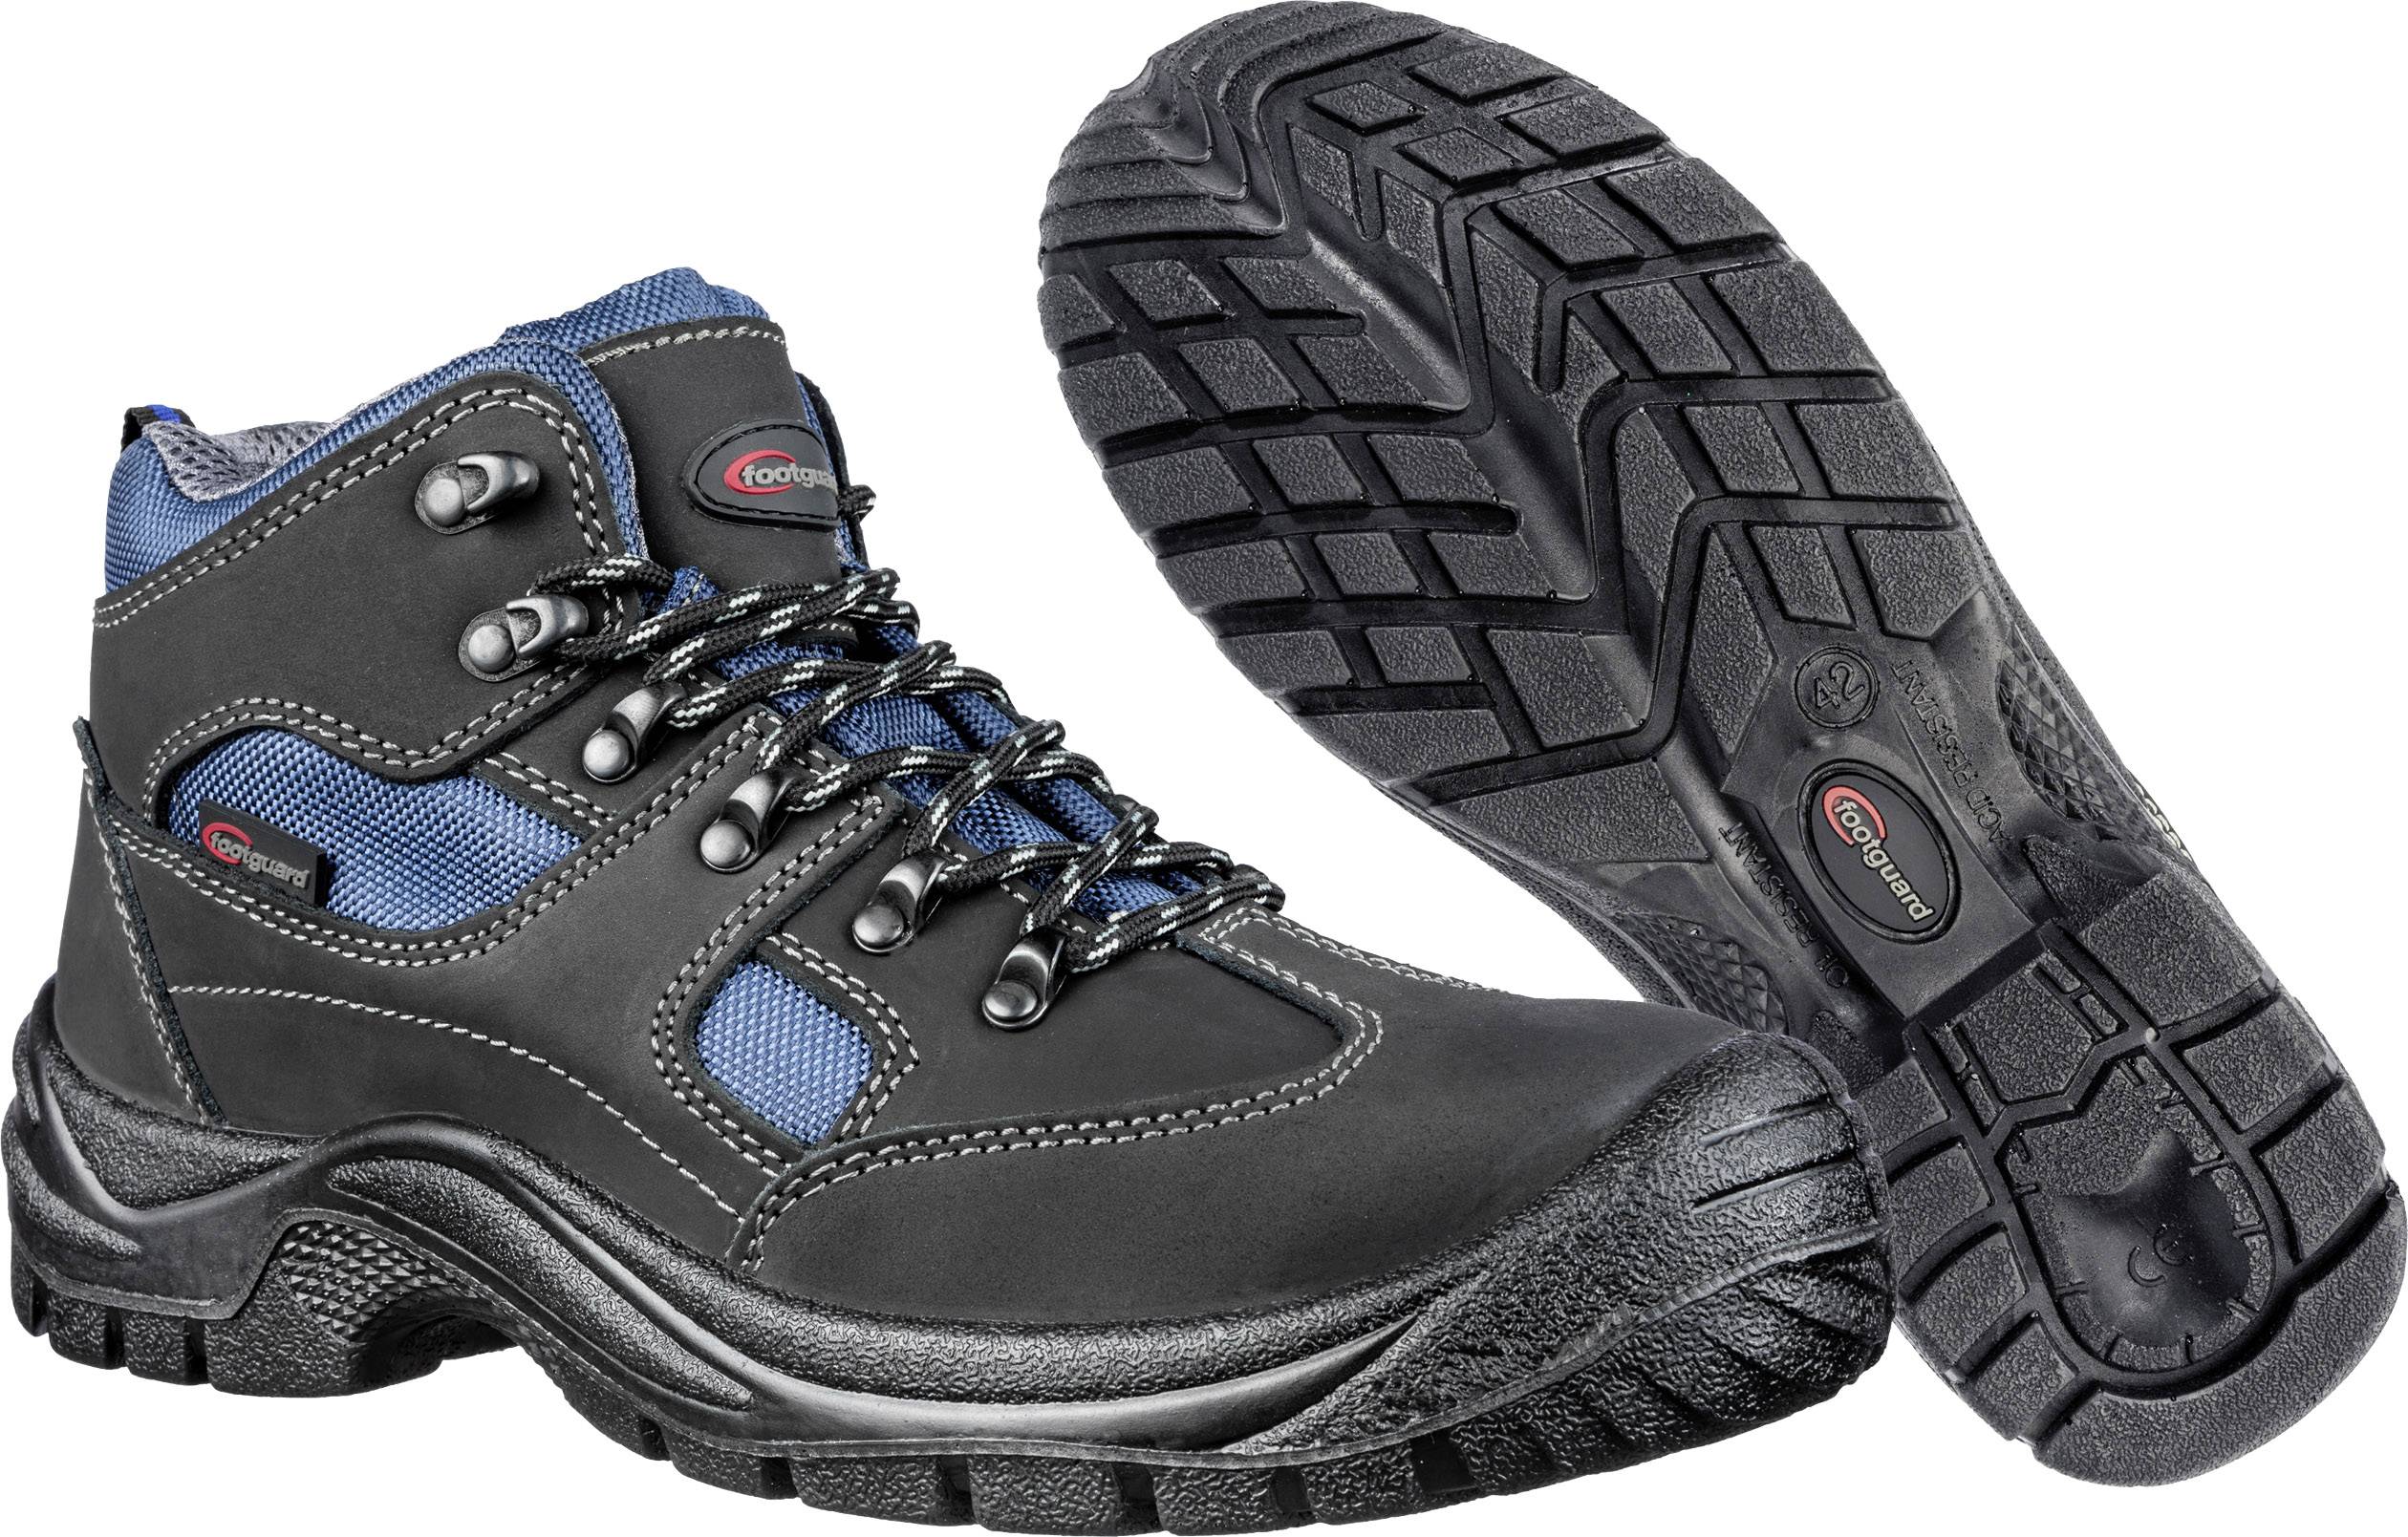 About Blue Safety Boots | lupon.gov.ph